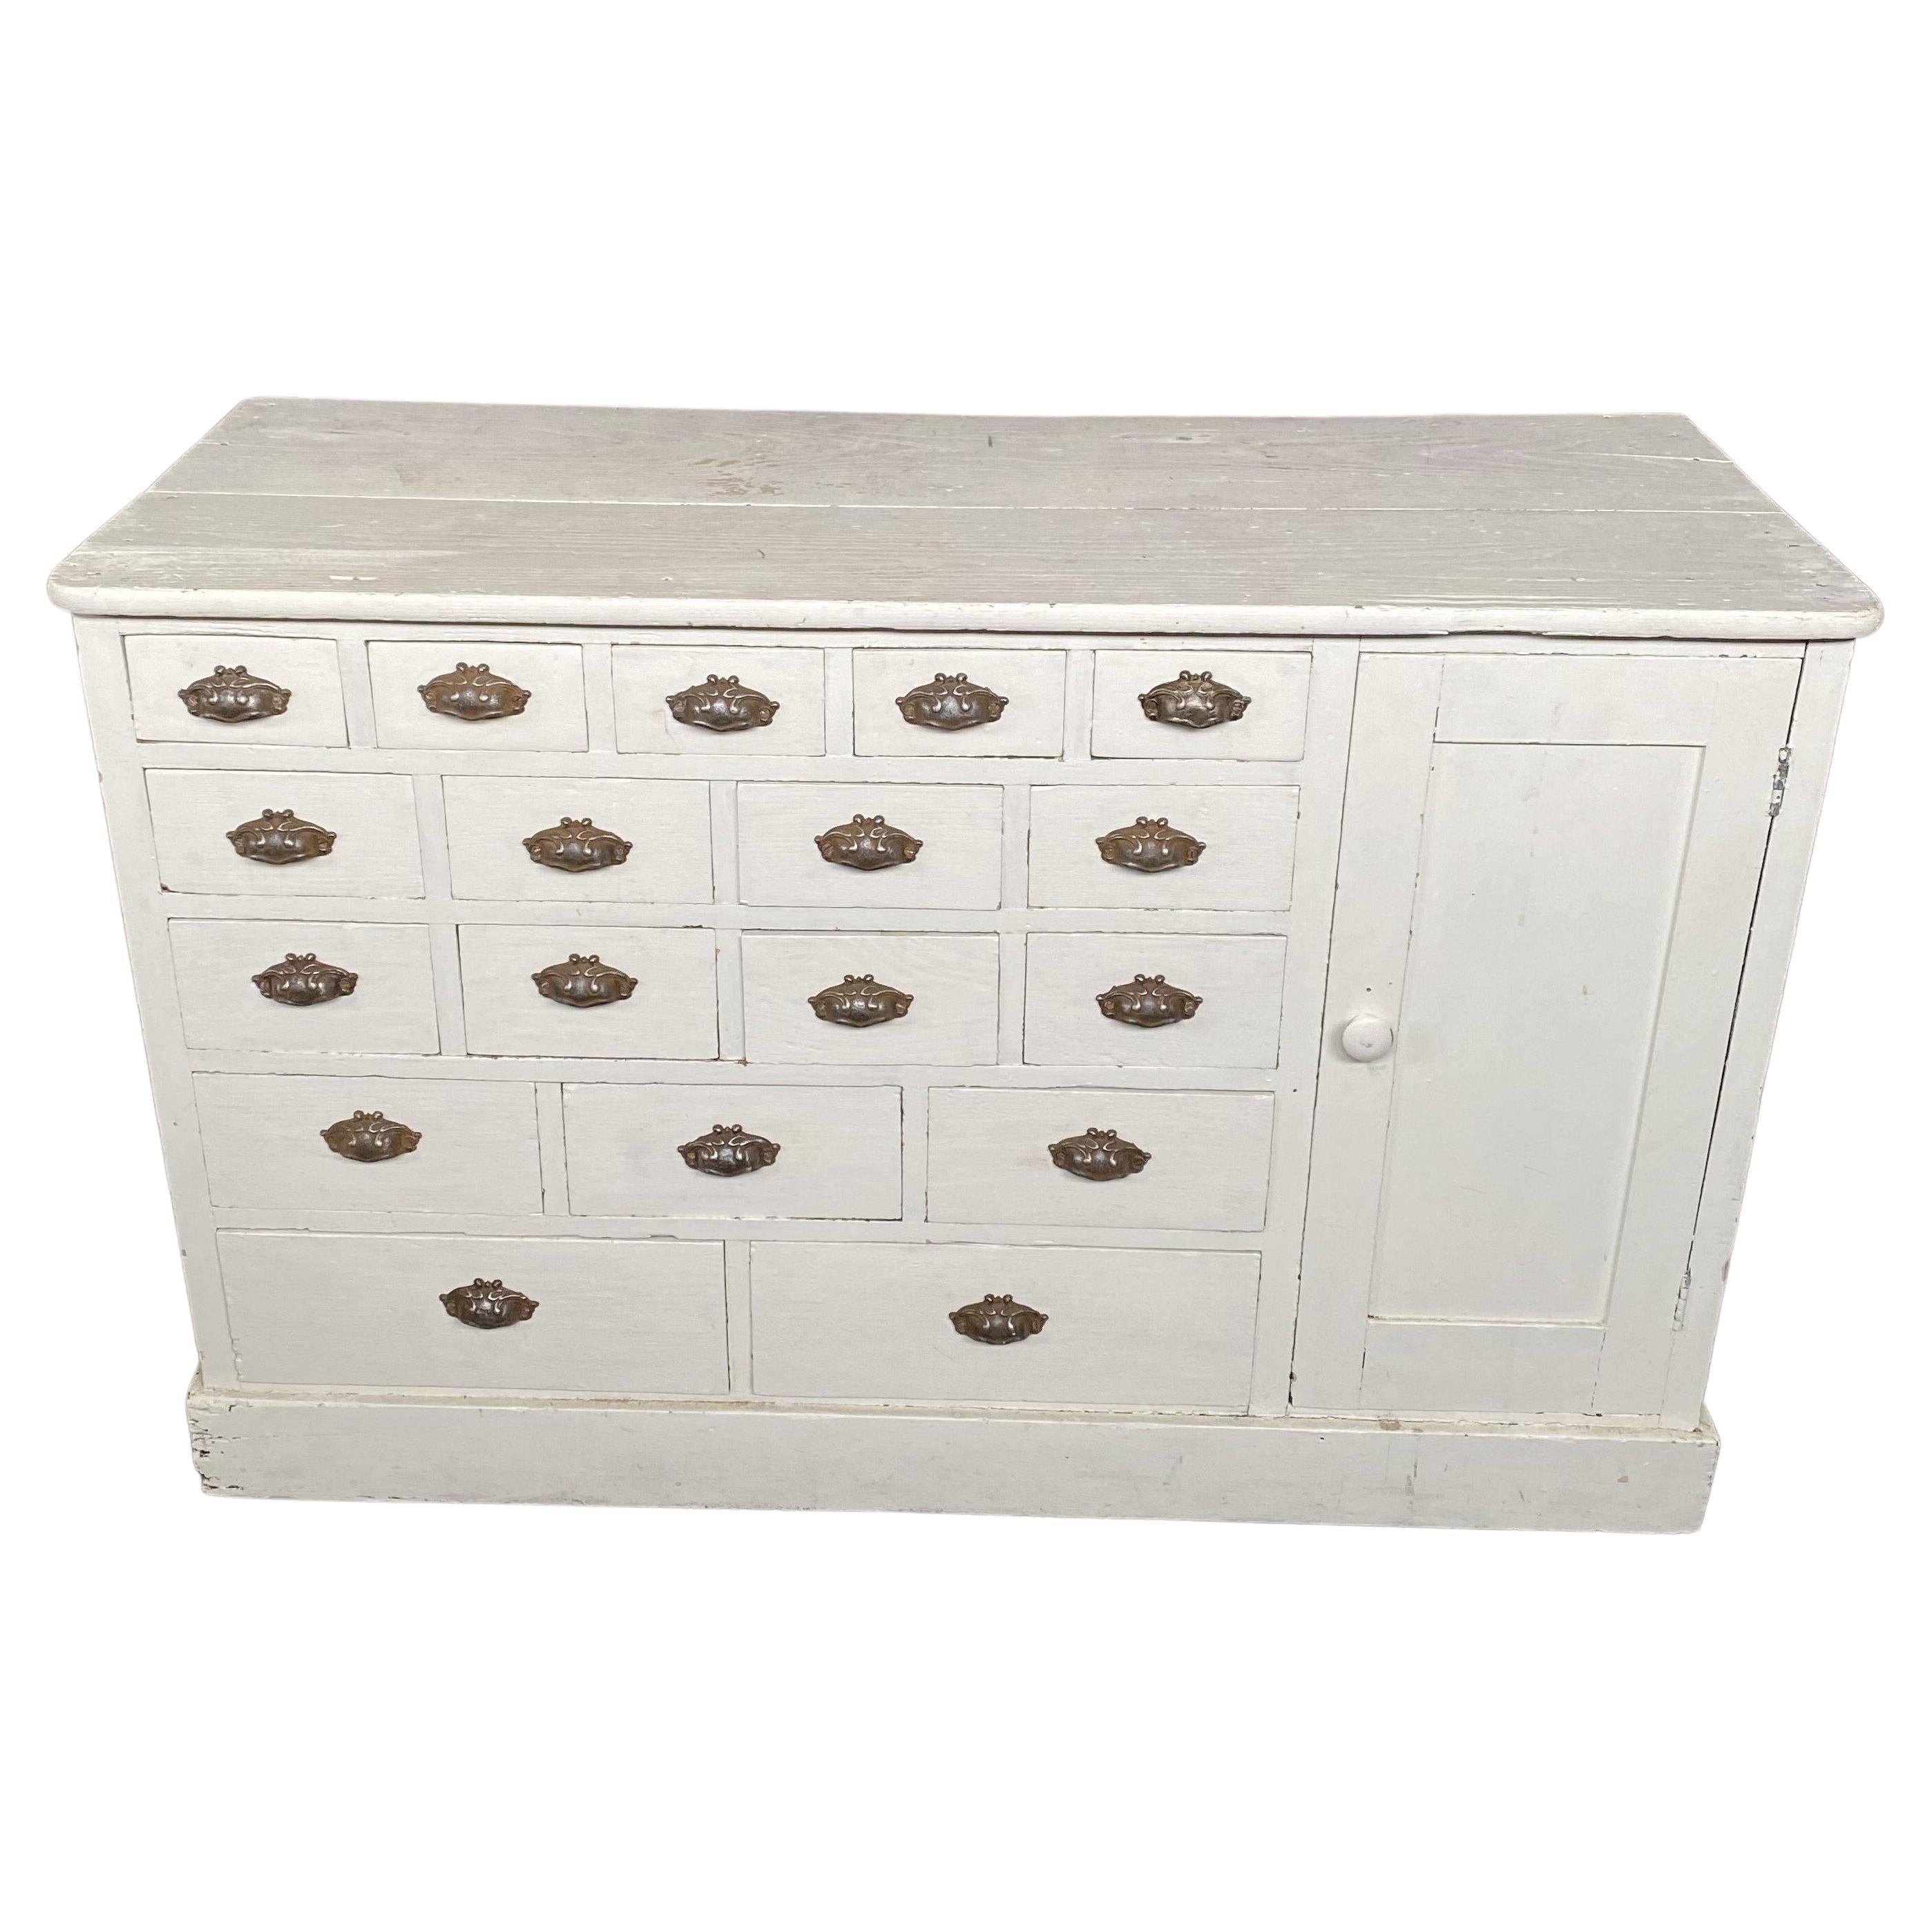 Early American Apothecary Shop Cabinet Chest of Drawers with 18 Drawers